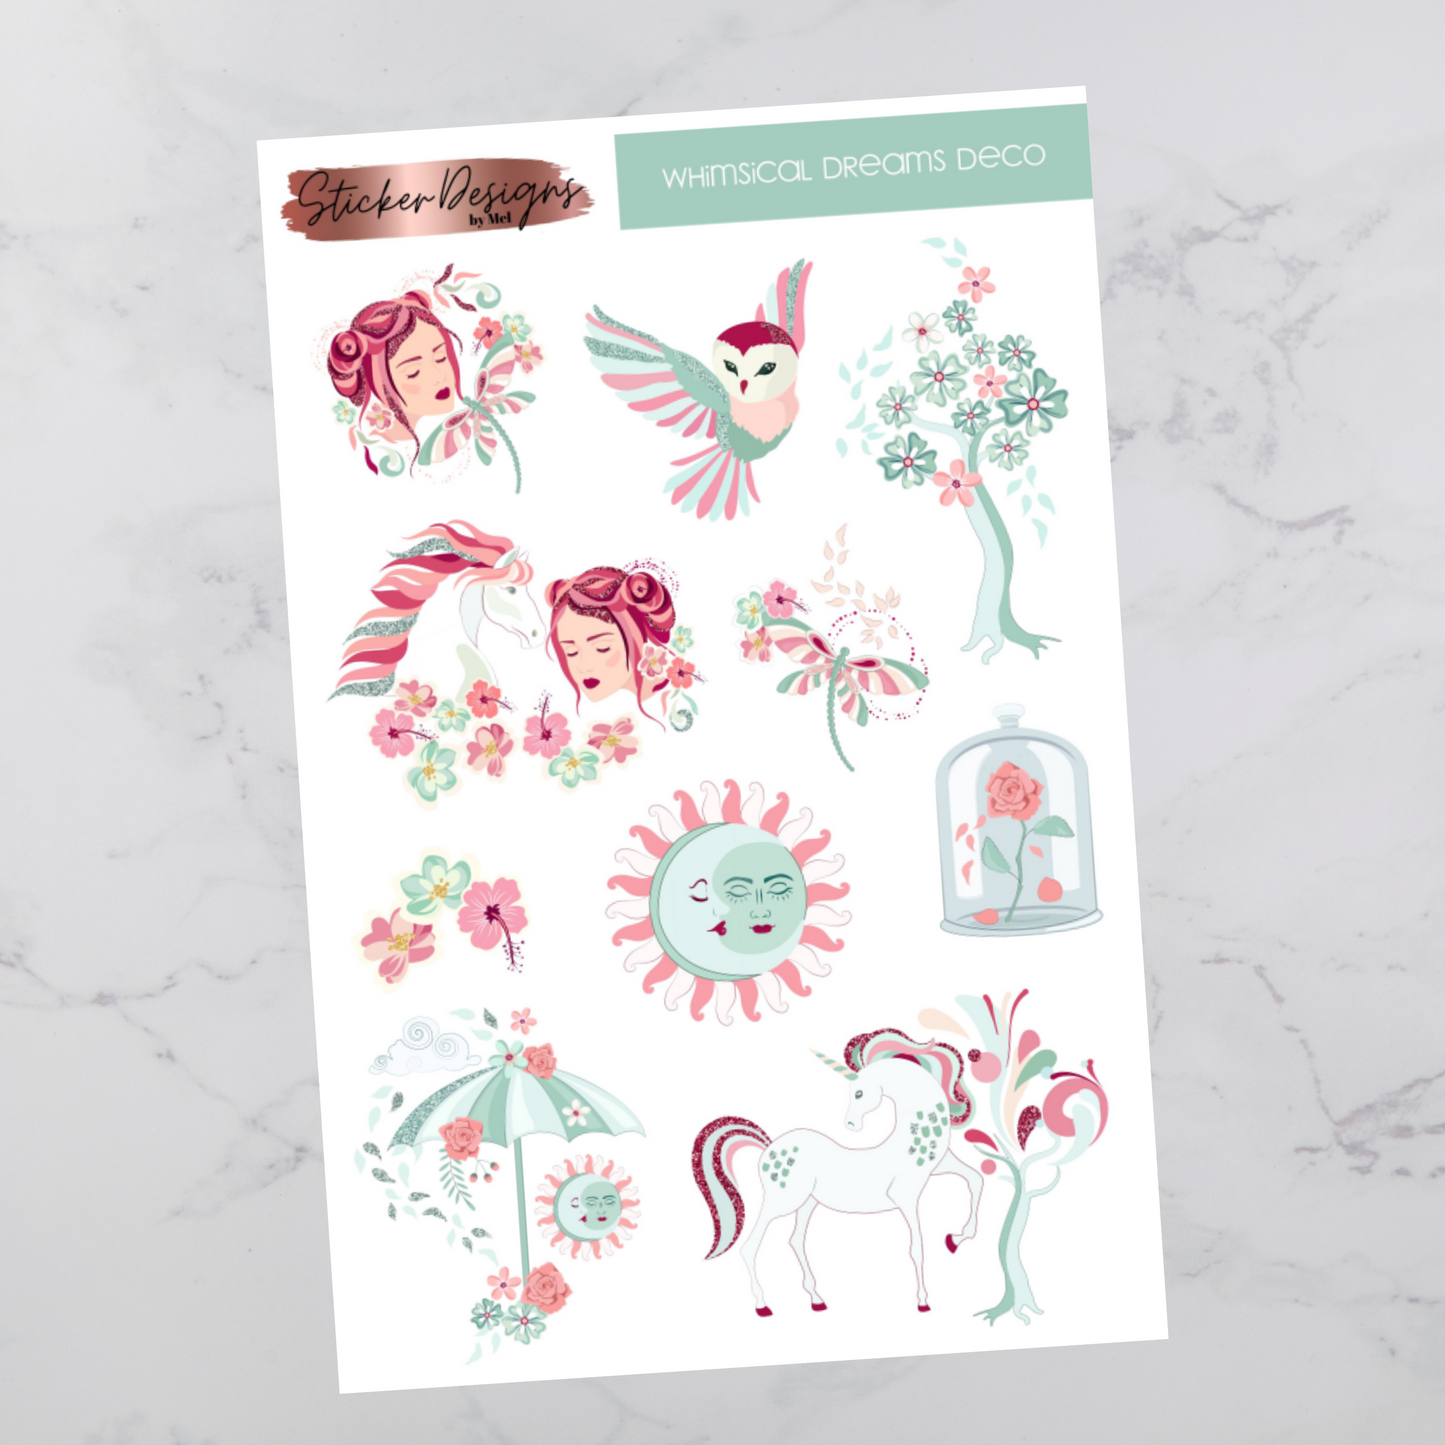 Whimsical Dreams - Deco Stickers